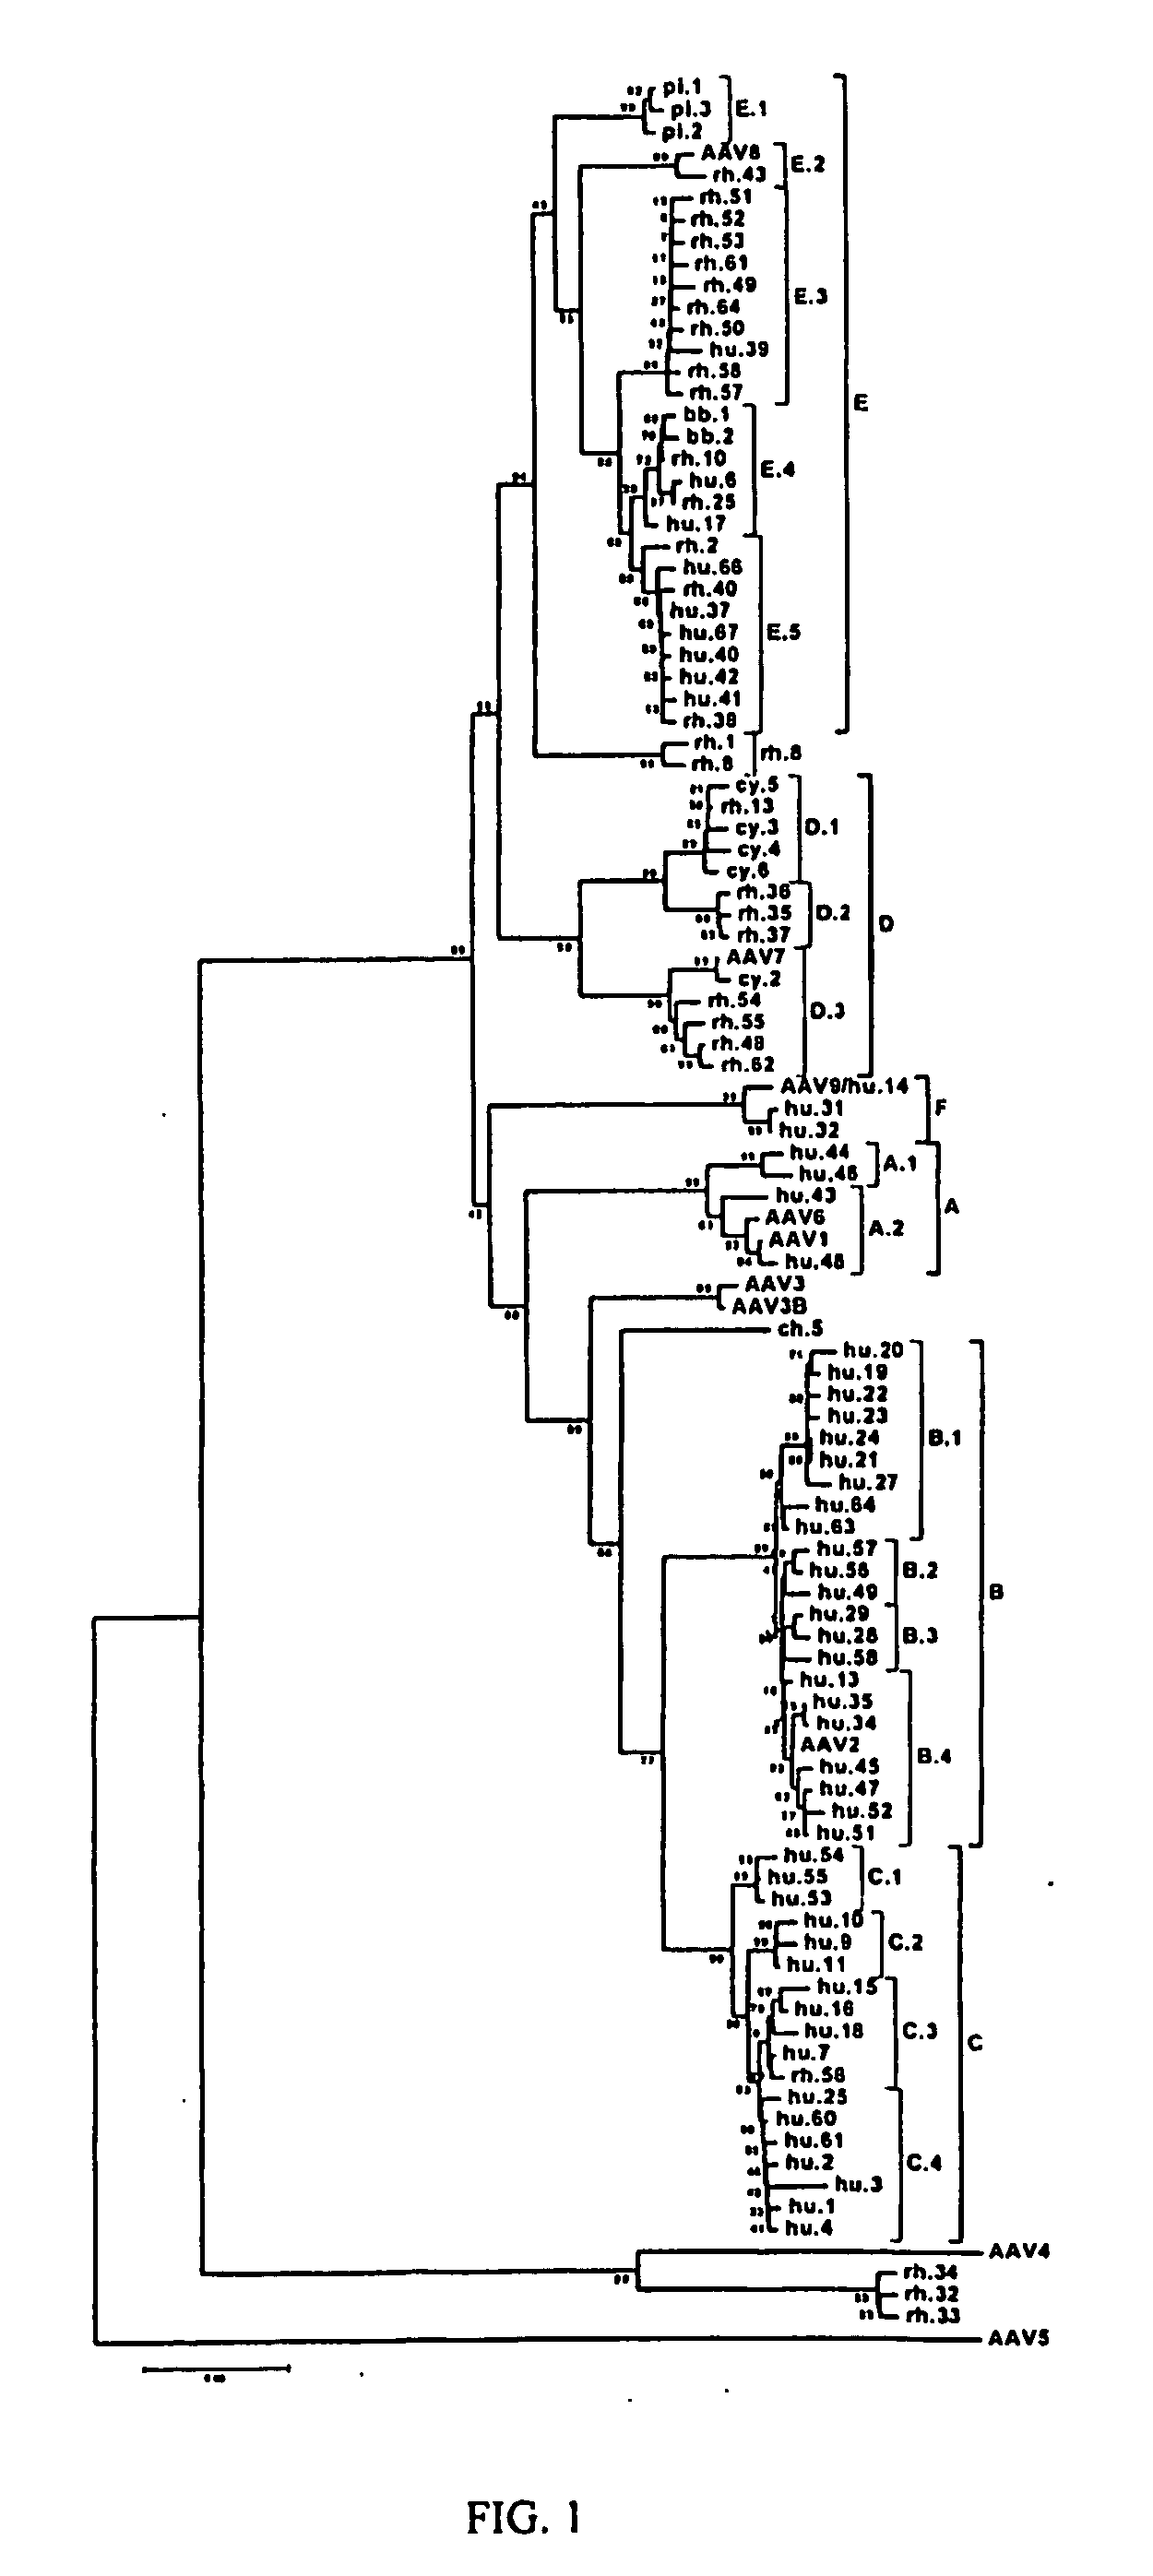 Adeno-associated virus (aav) clades, sequences, vectors containing same, and uses therefor